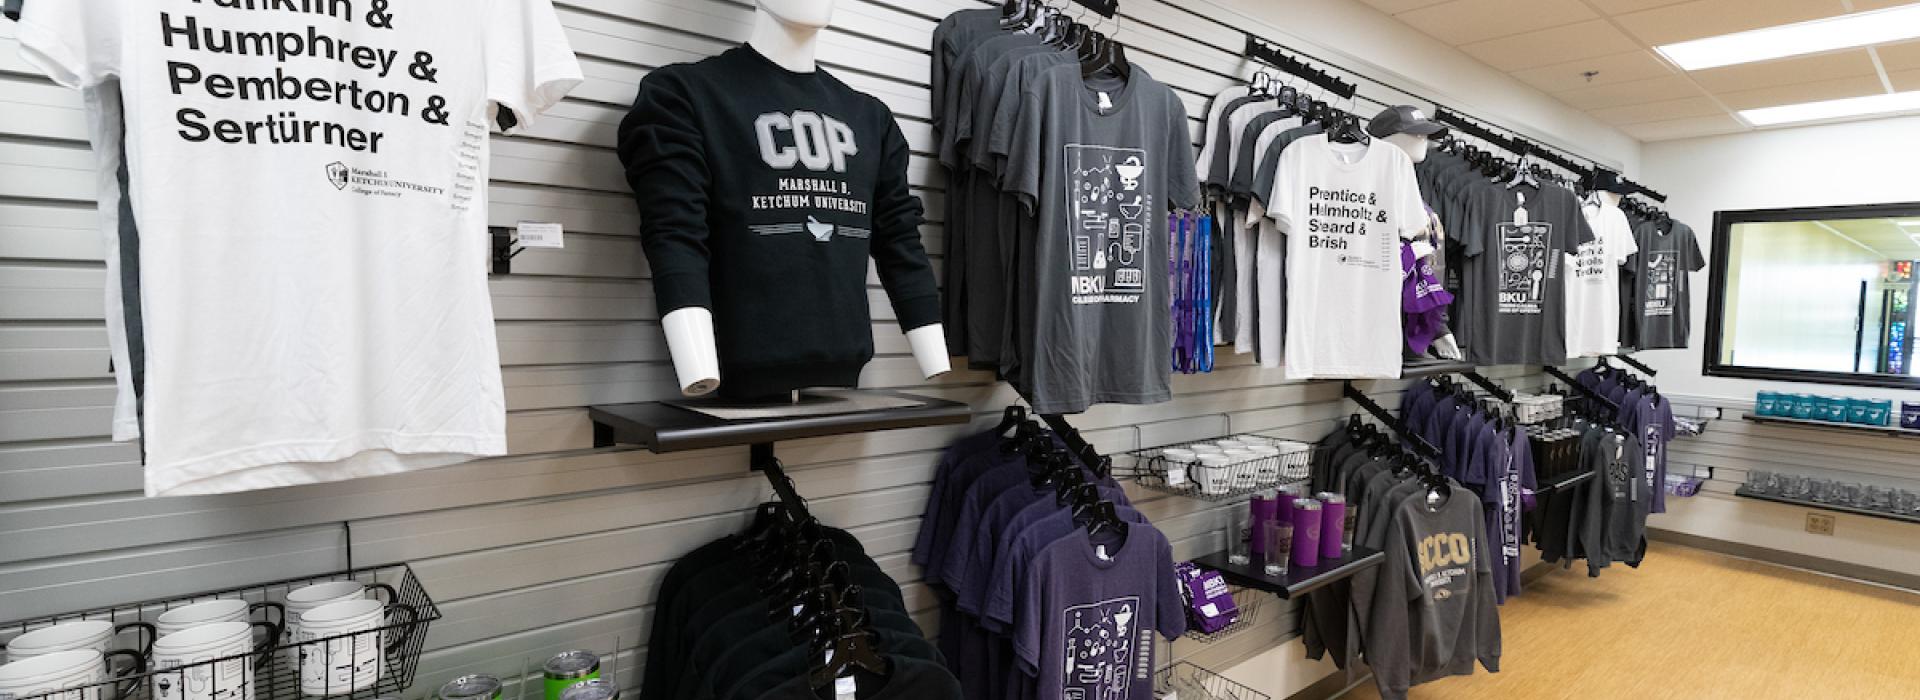 View of various clothing designs inside Campus Store